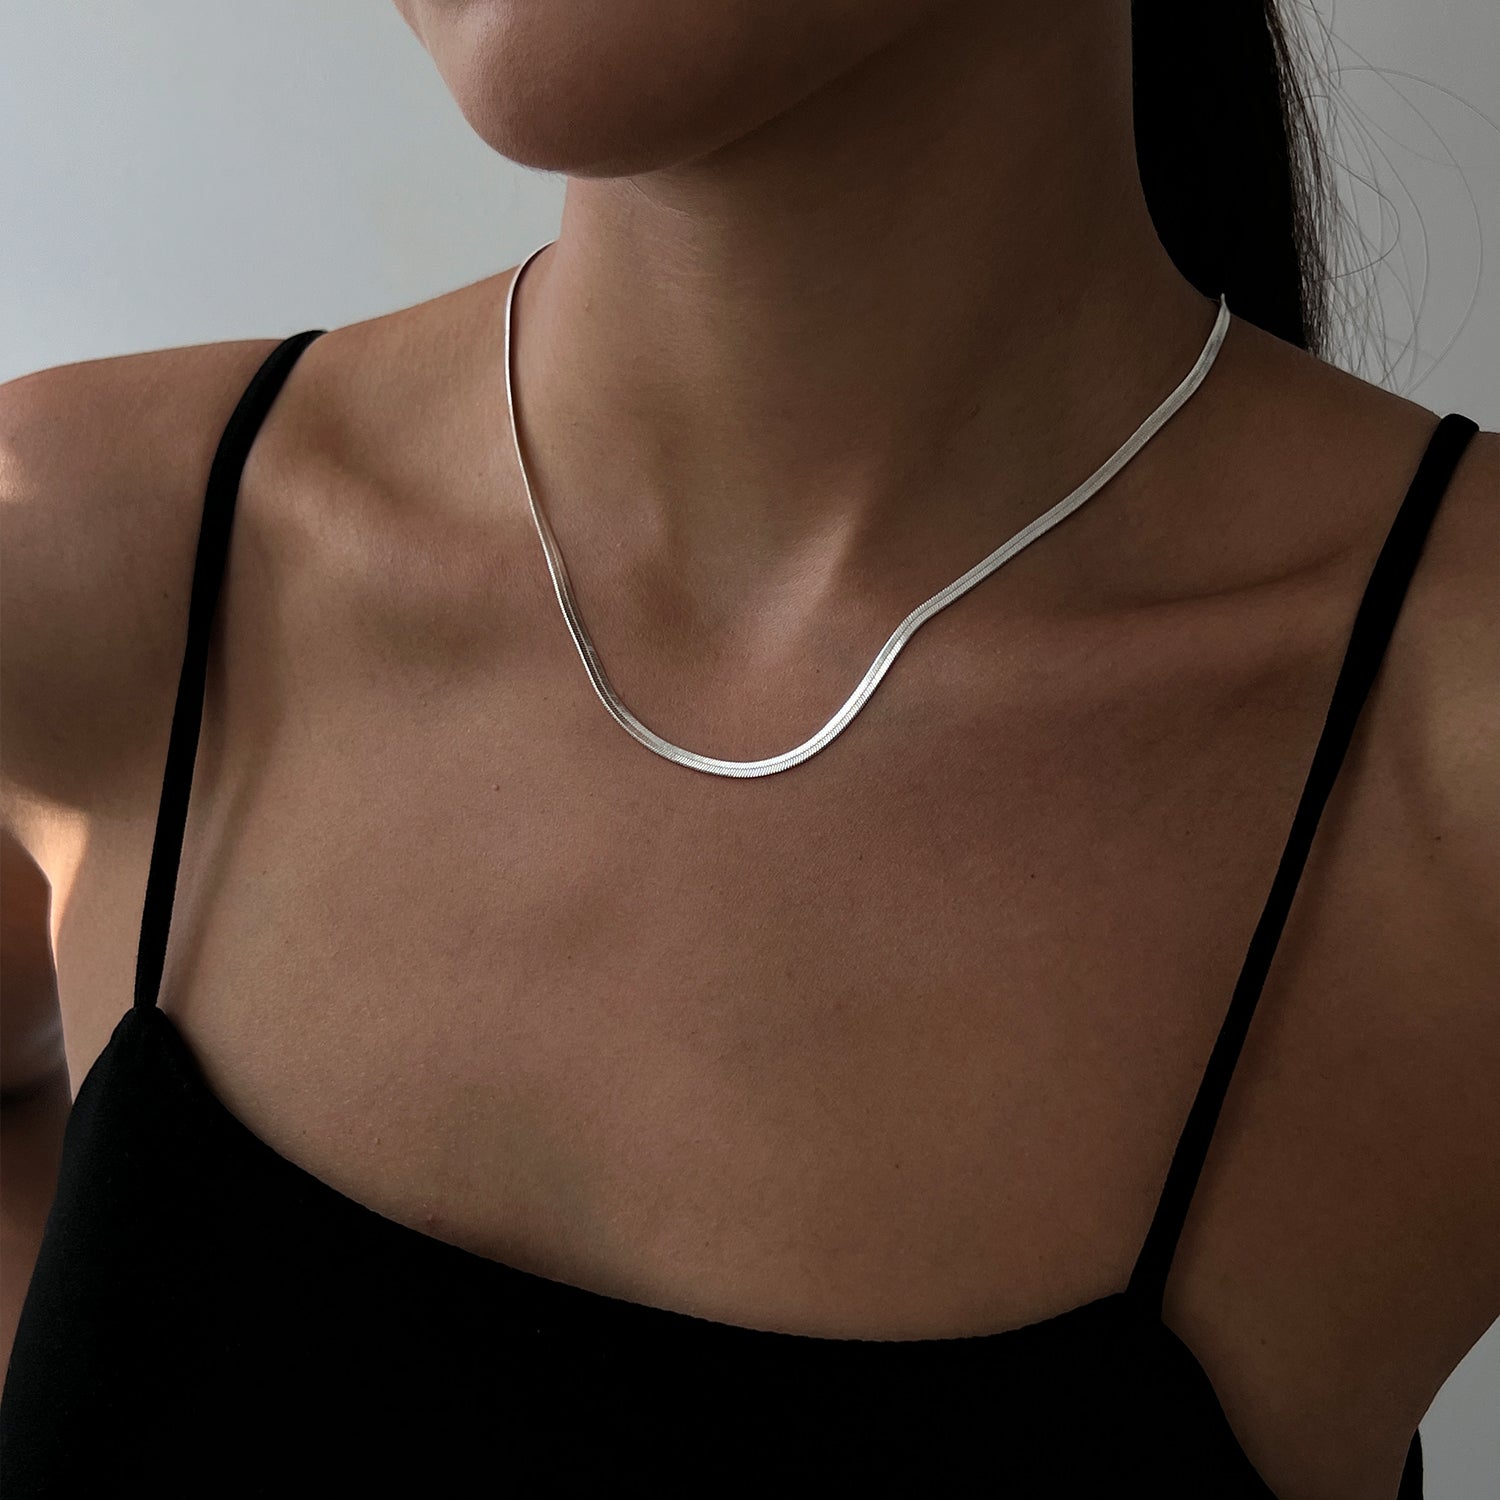 Silver snake chain necklace